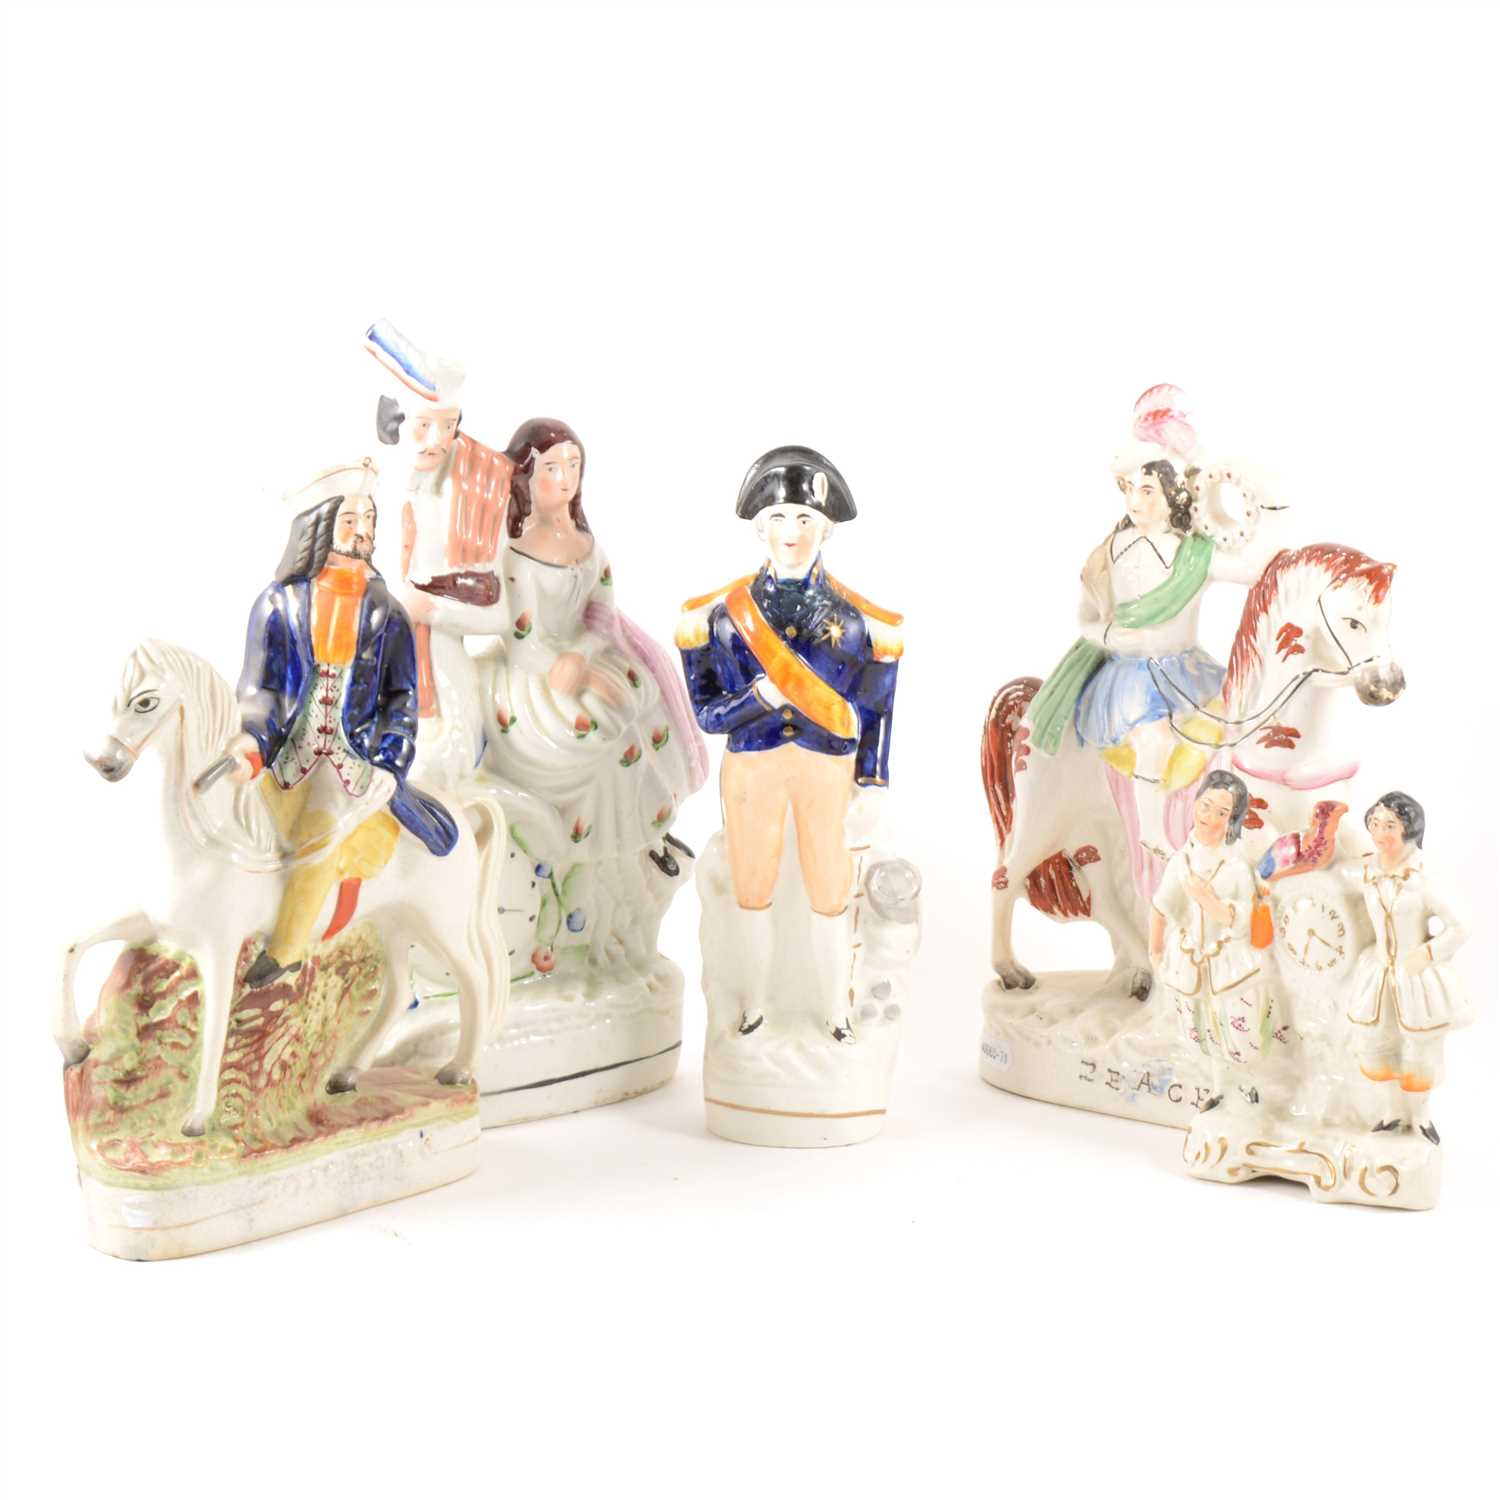 Lot 54 - A Staffordshire equestrian figure, Prince of Wales, and a collection of other figures and groups.